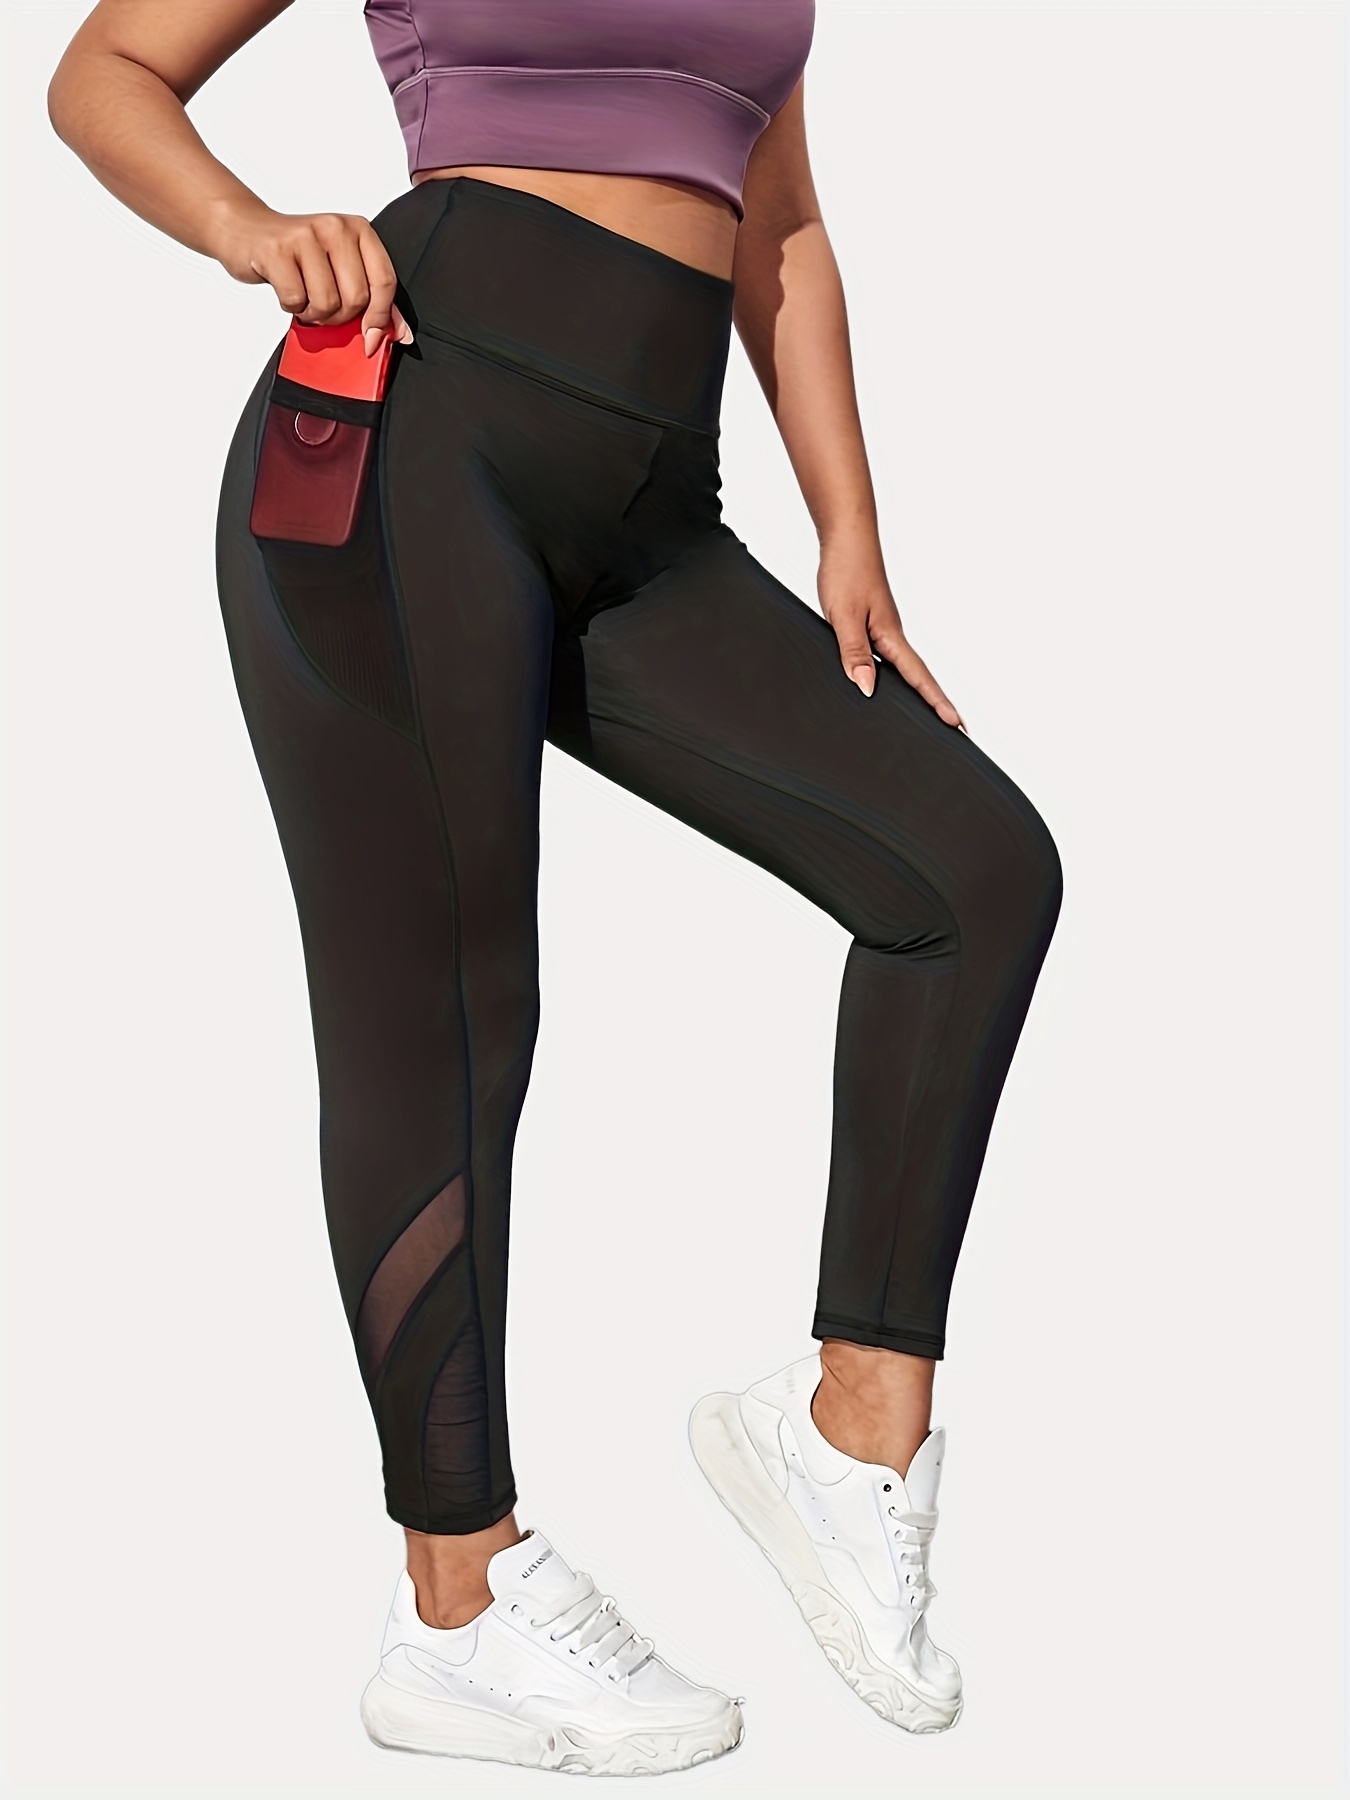 Plus Size Sports Leggings, Women's Plus Contrast Mesh Wide Waistband High *  Running Yoga Leggings With Phone Pockets